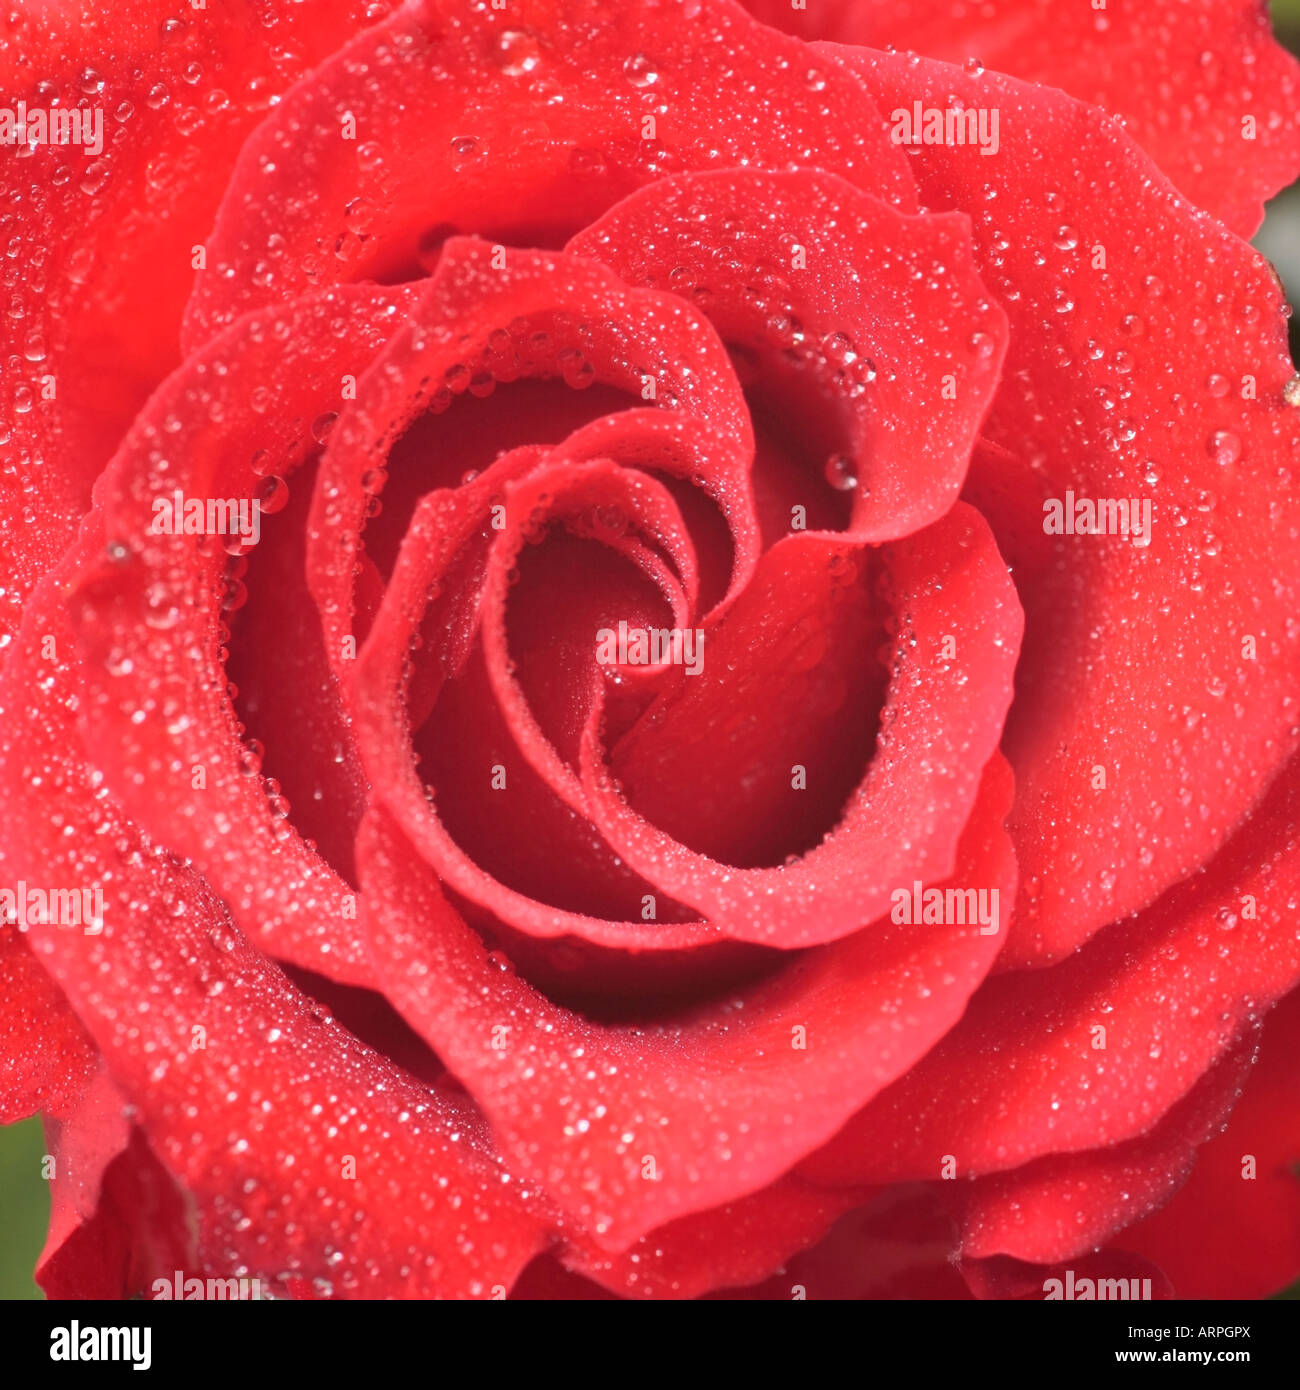 Close up detail of a single red rose covered with water droplets Stock Photo